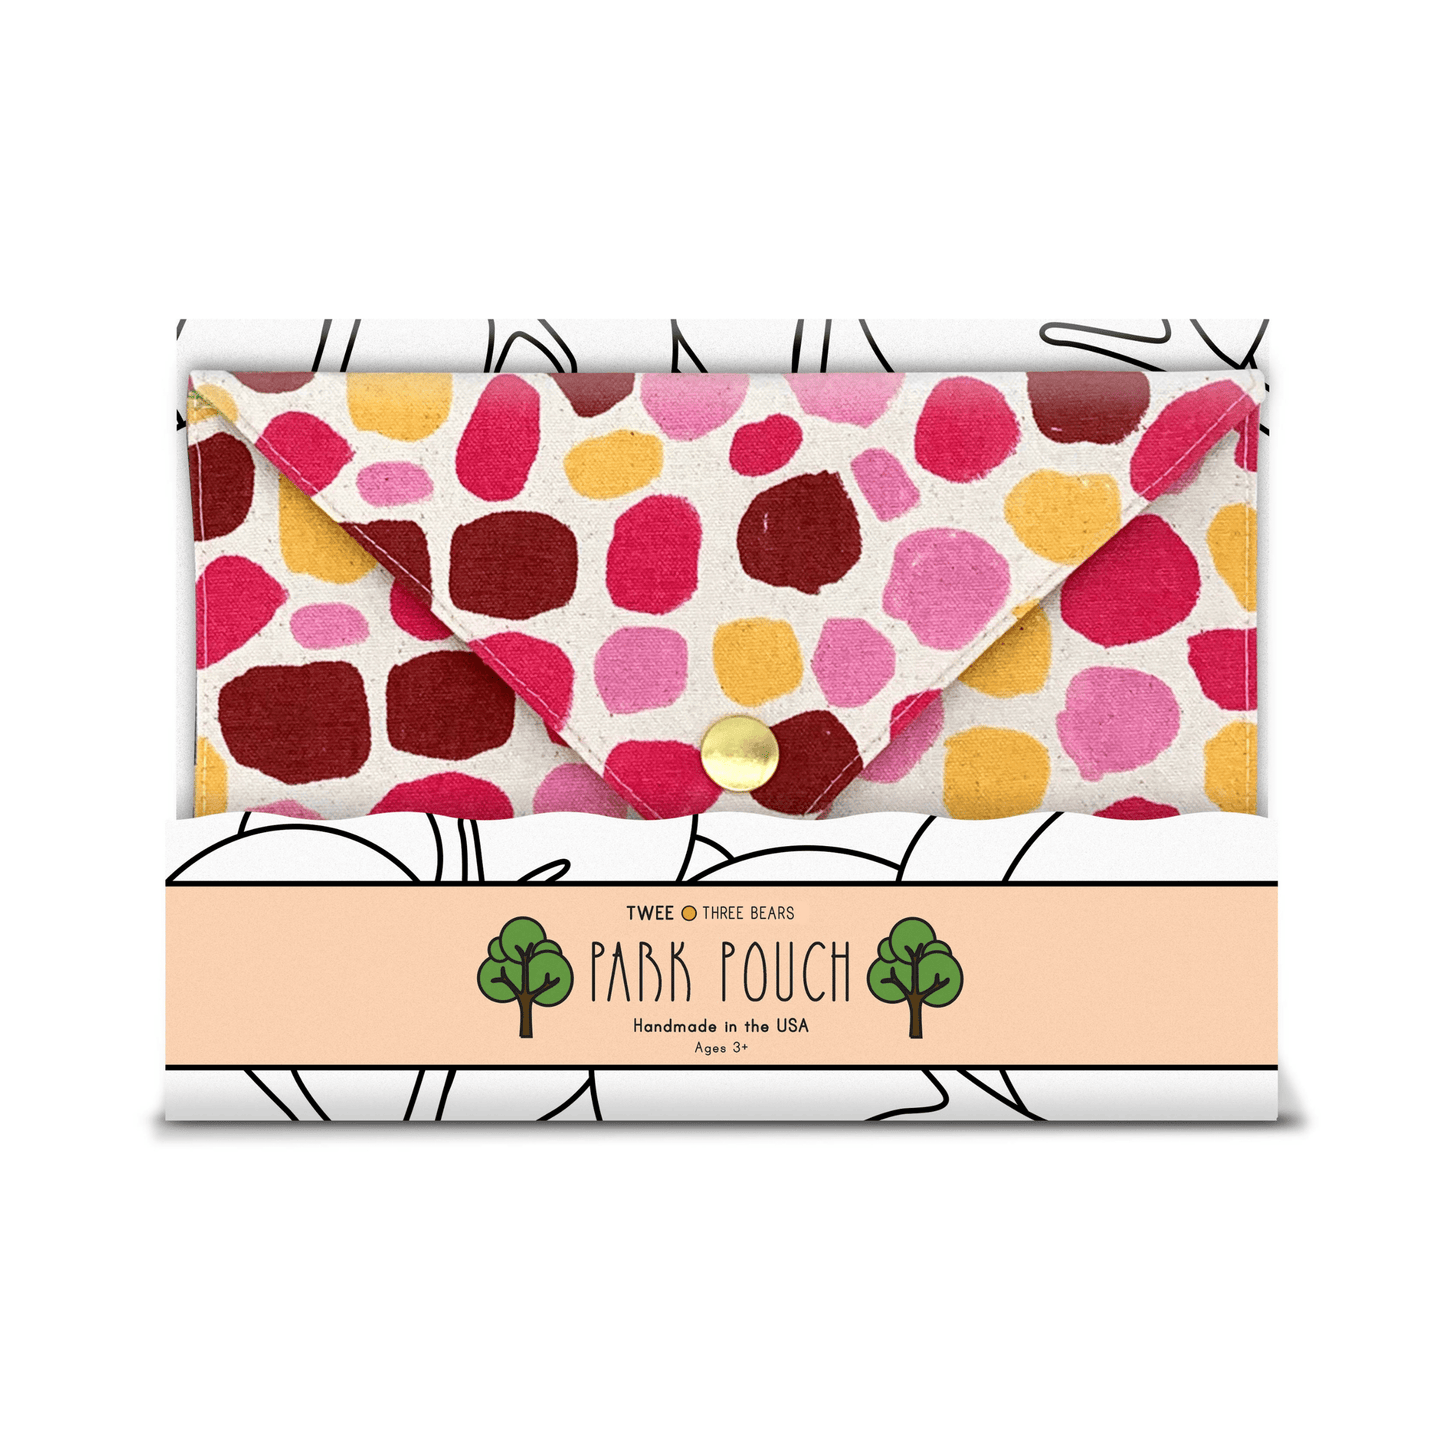 Twee Park Pouch TWEE | NEW! LIMITED EDITION! | THREE BEARS PARK | PARK POUCH